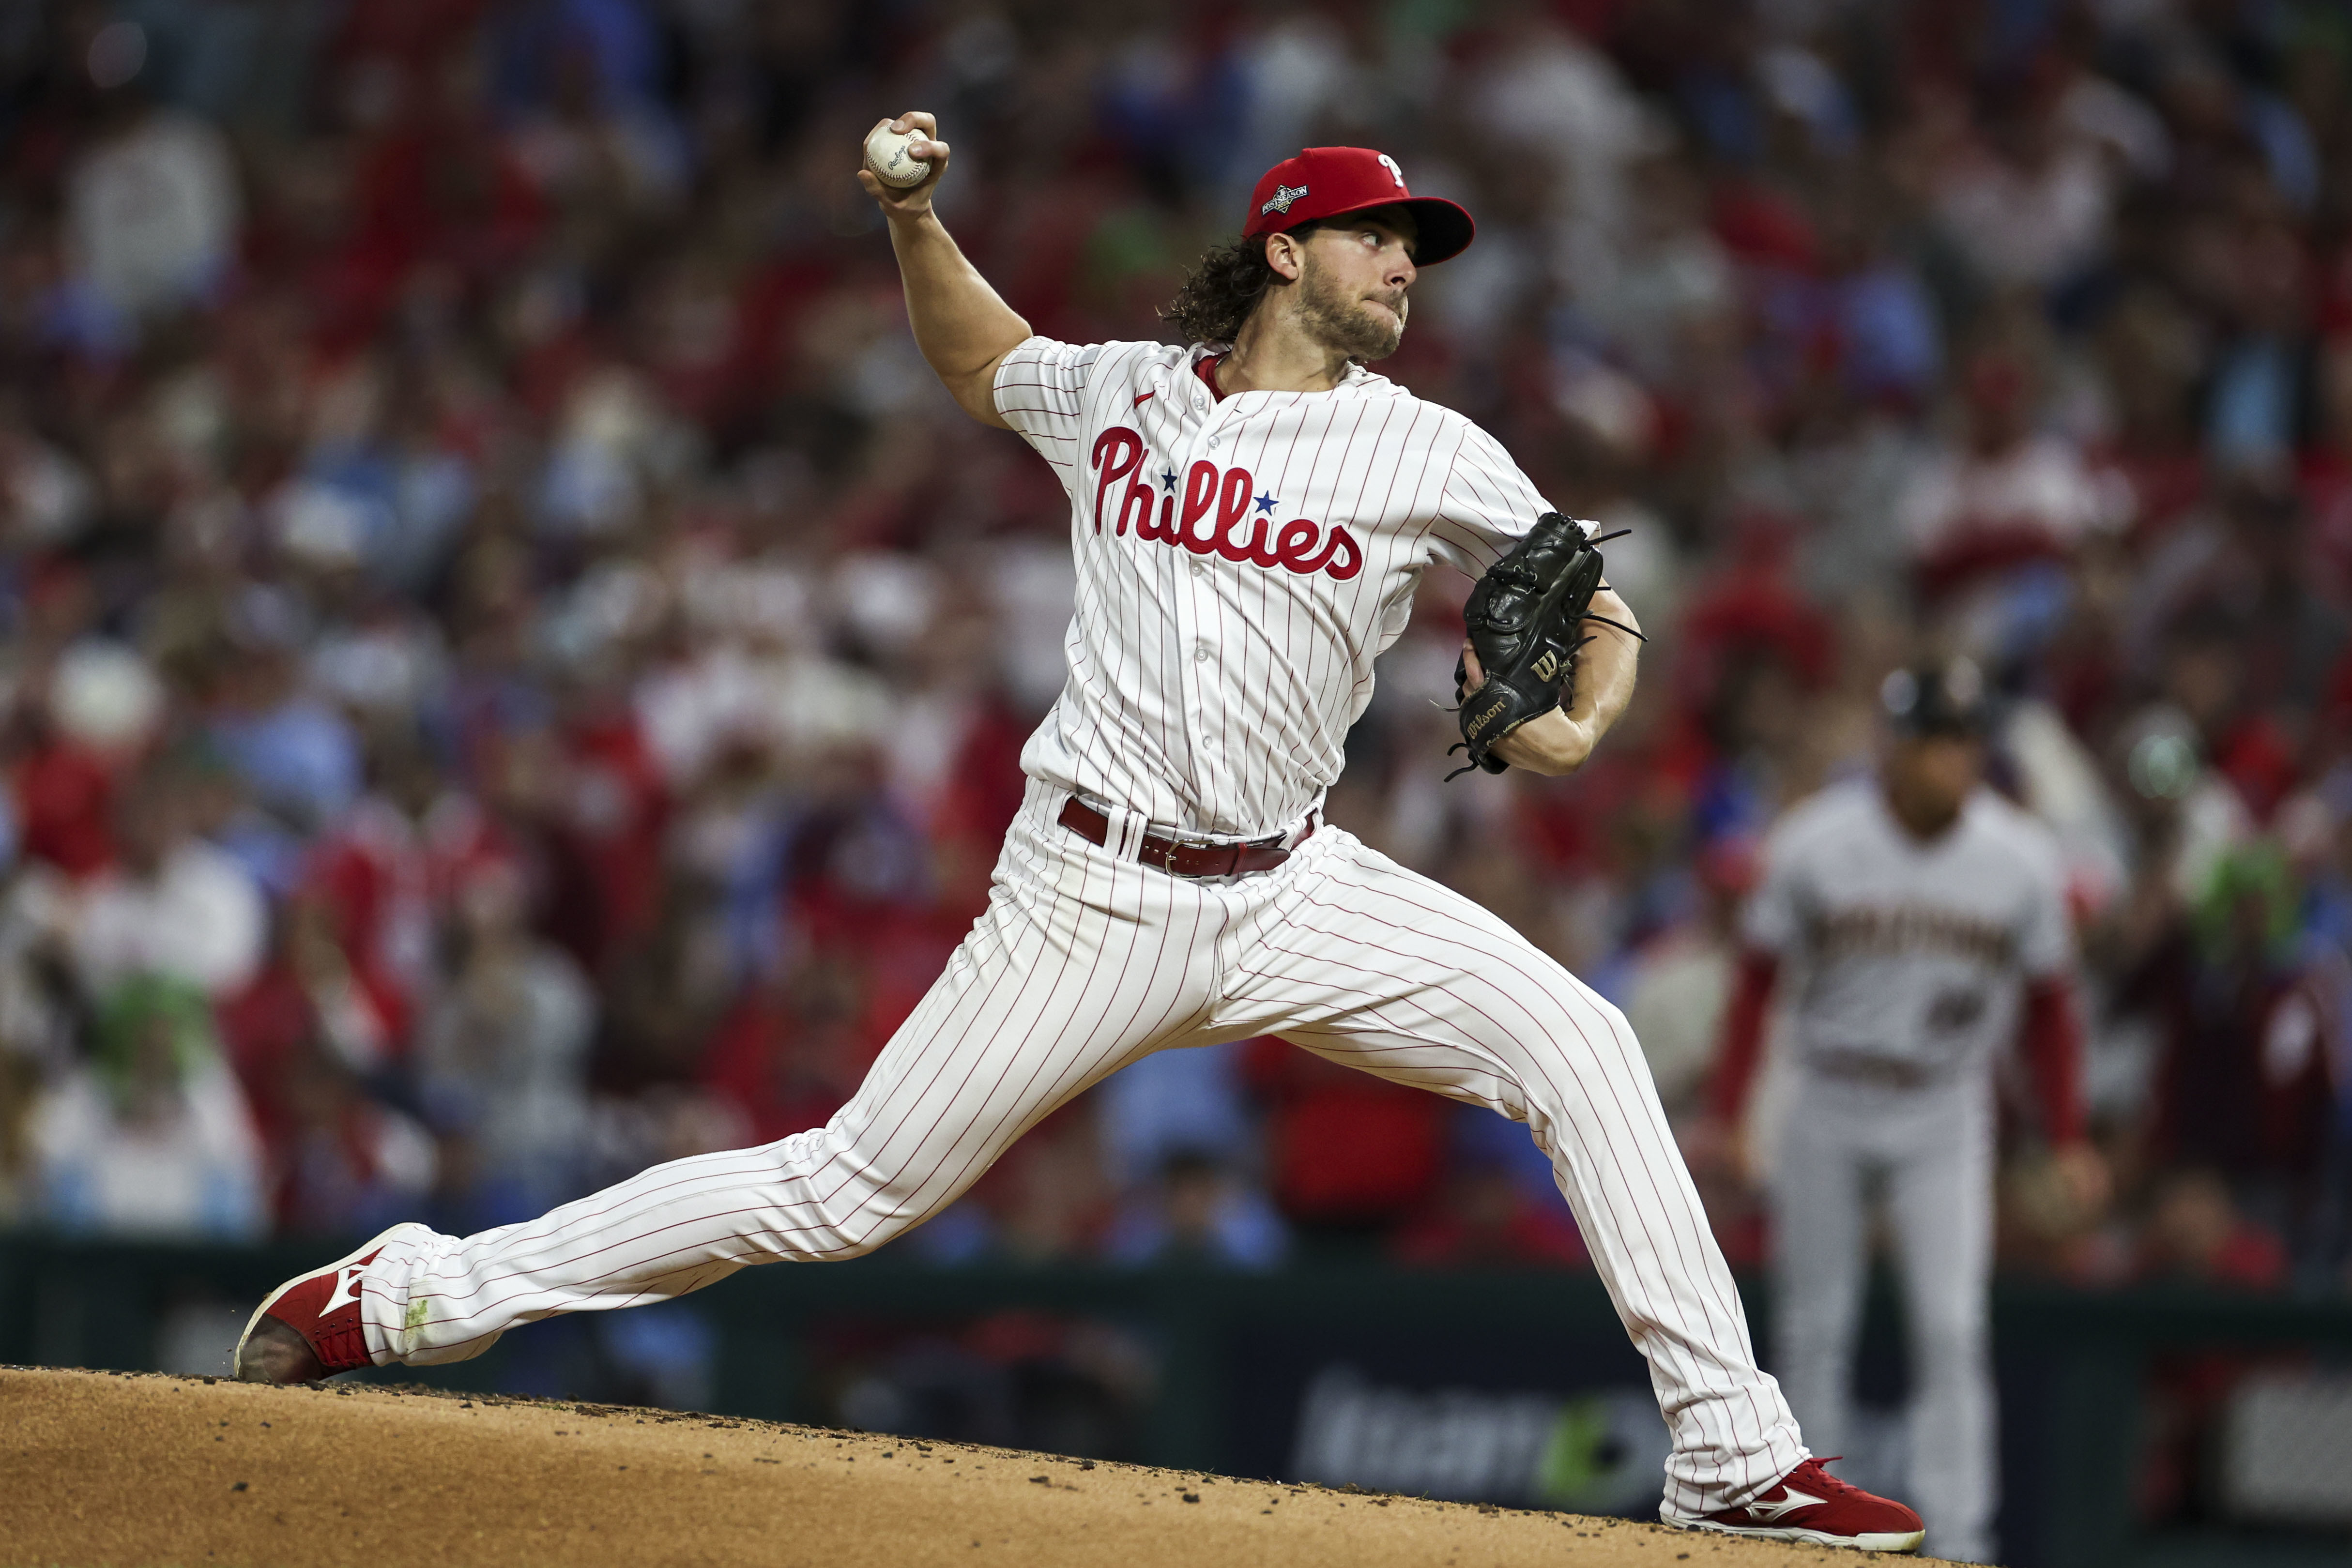 Phillies: Wheeler says he'll always have chip on shoulder about Mets